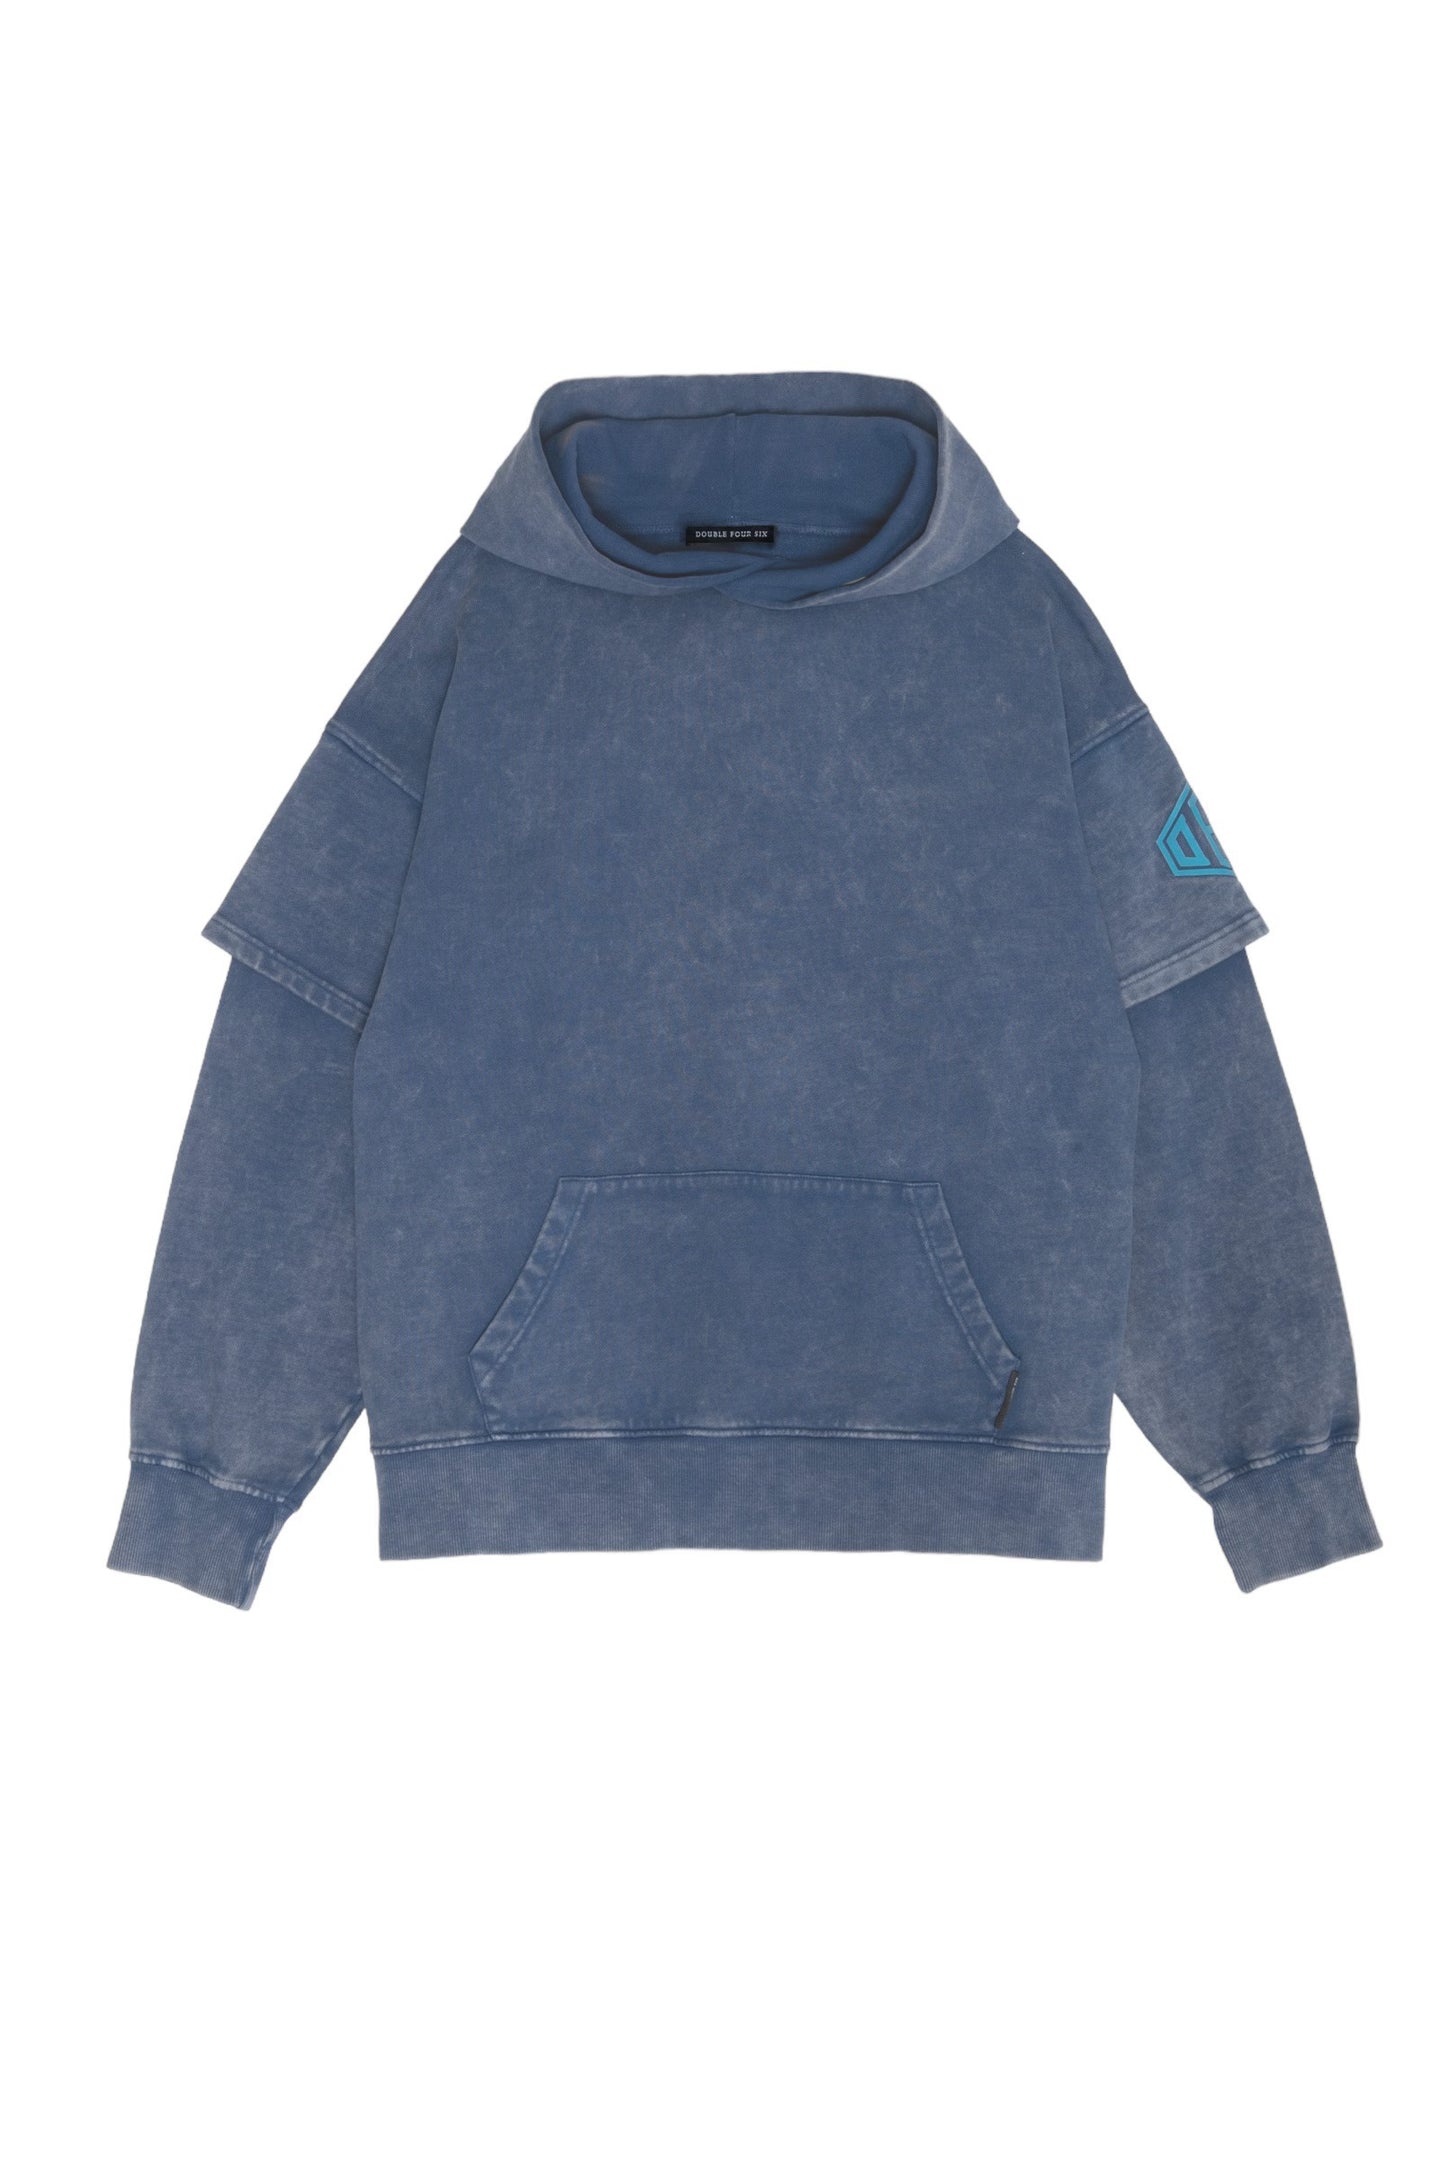 DFS-Silicon Logo  Layered Sleeve Hoodie Blue